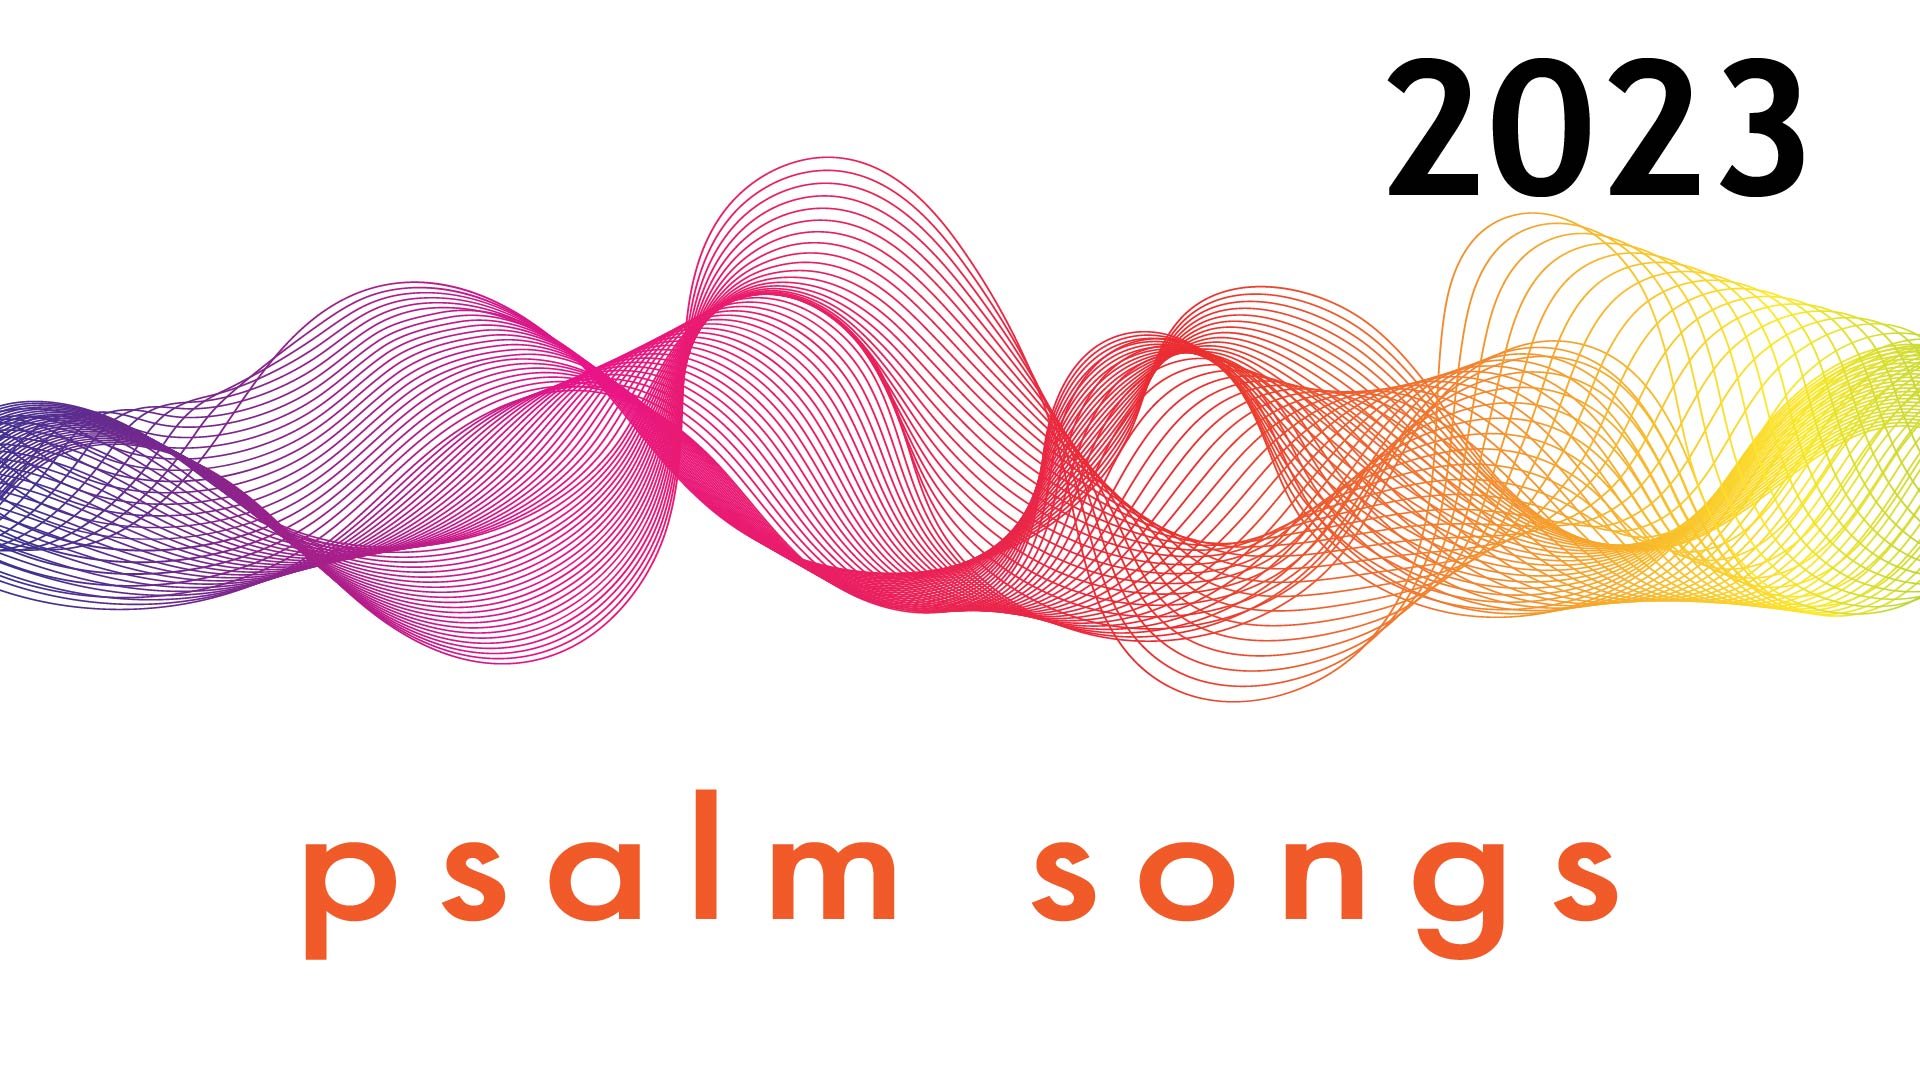 A colorful audio waveform fills the picture. 'Psalm Songs' is written below it. (Copy)